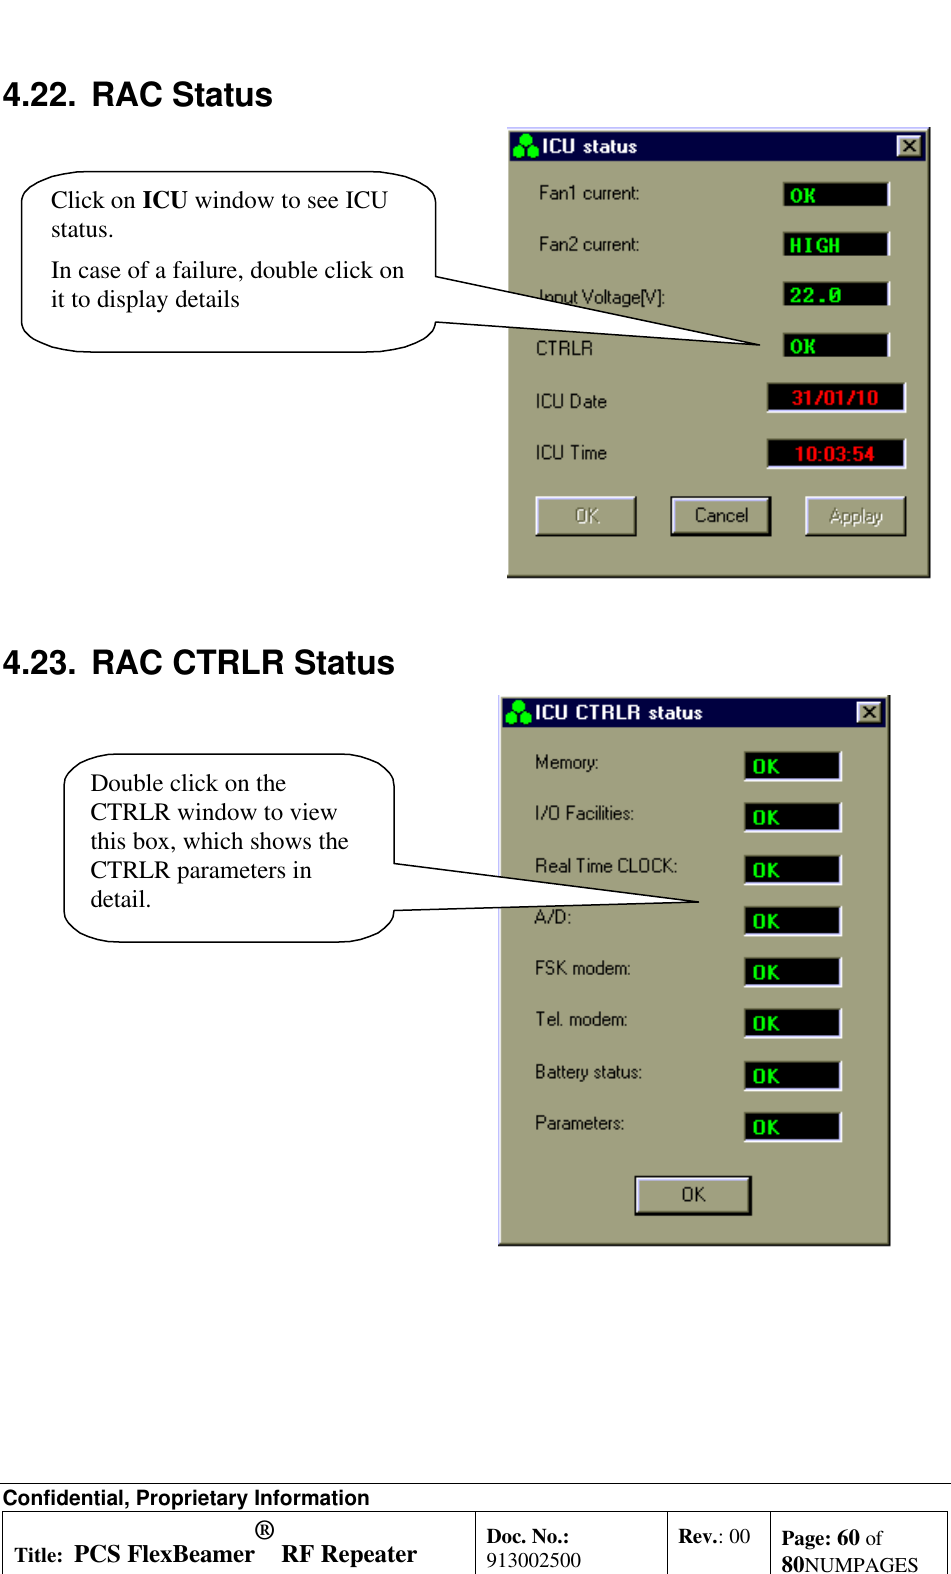 Confidential, Proprietary InformationTitle: PCS FlexBeamer® RF RepeaterSystem A &amp;O ManualDoc. No.:913002500 Rev.: 00 Page: 60 of80NUMPAGES4.22. RAC StatusClick on ICU window to see ICUstatus.In case of a failure, double click onit to display details4.23. RAC CTRLR StatusDouble click on theCTRLR window to viewthis box, which shows theCTRLR parameters indetail.